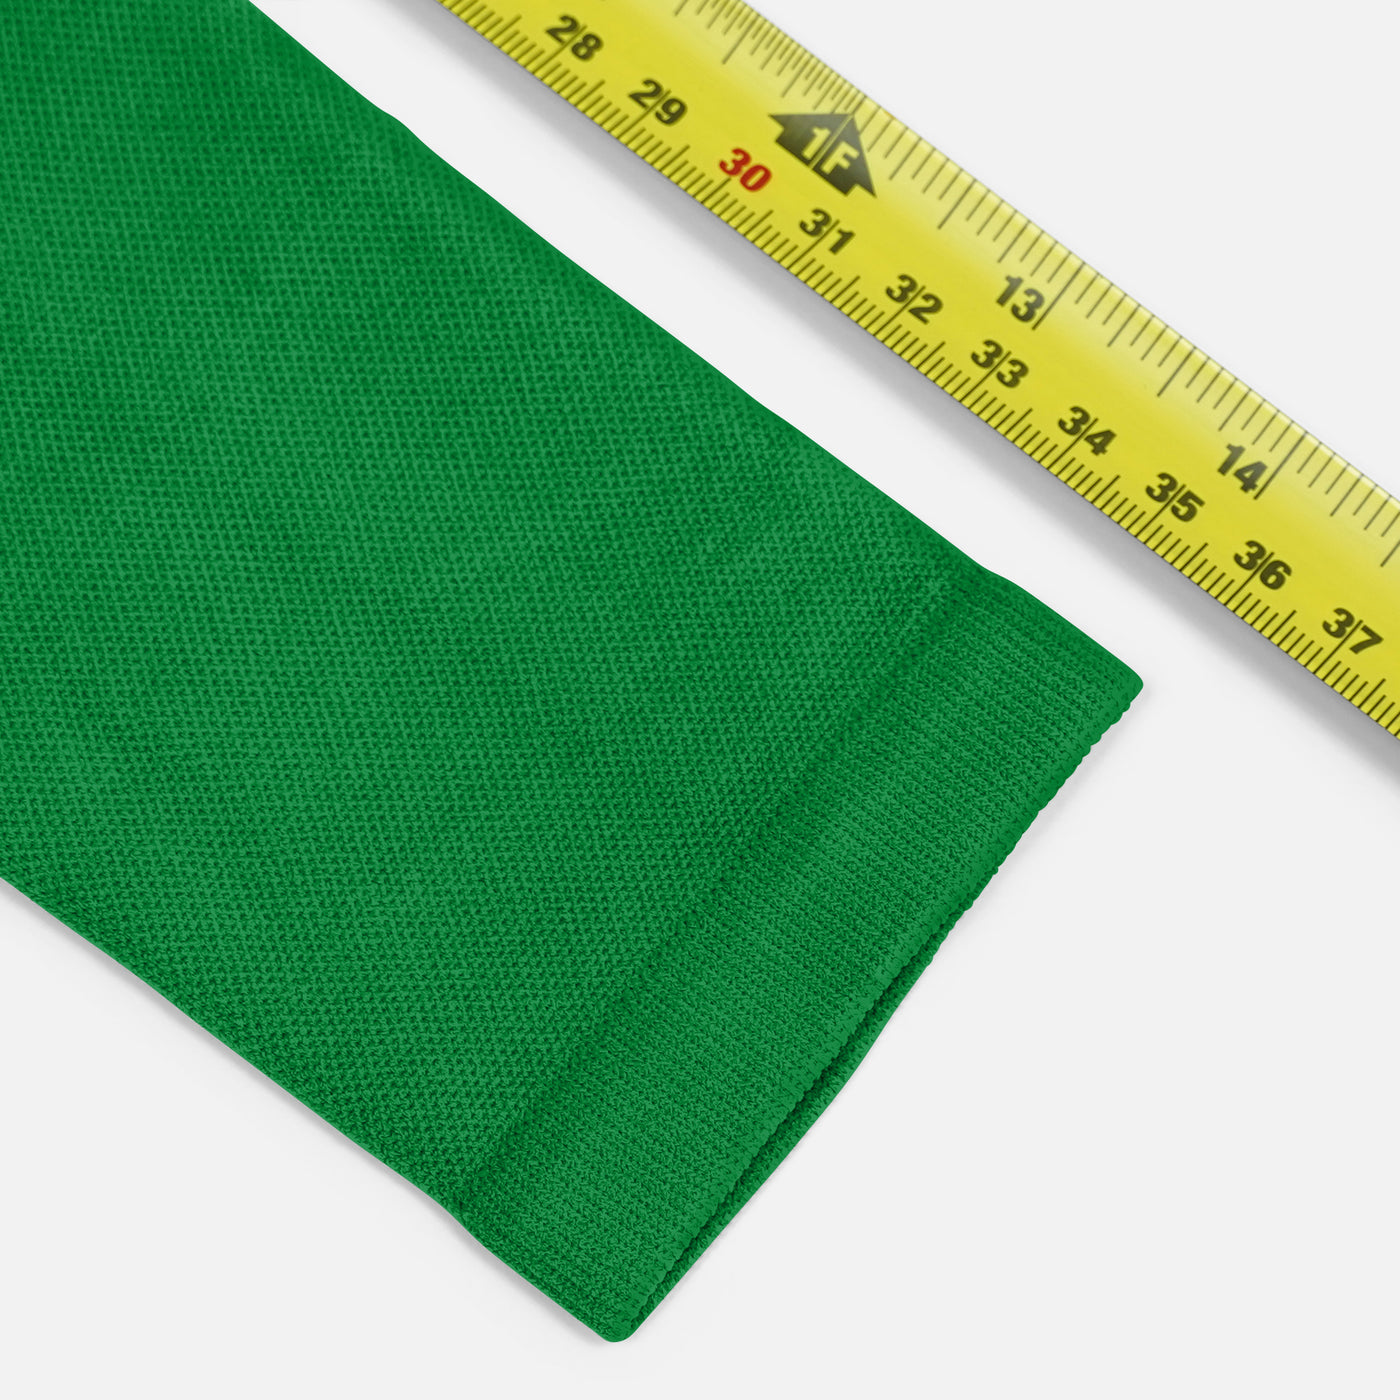 Hue Green One Size Fits All Arm Sleeve